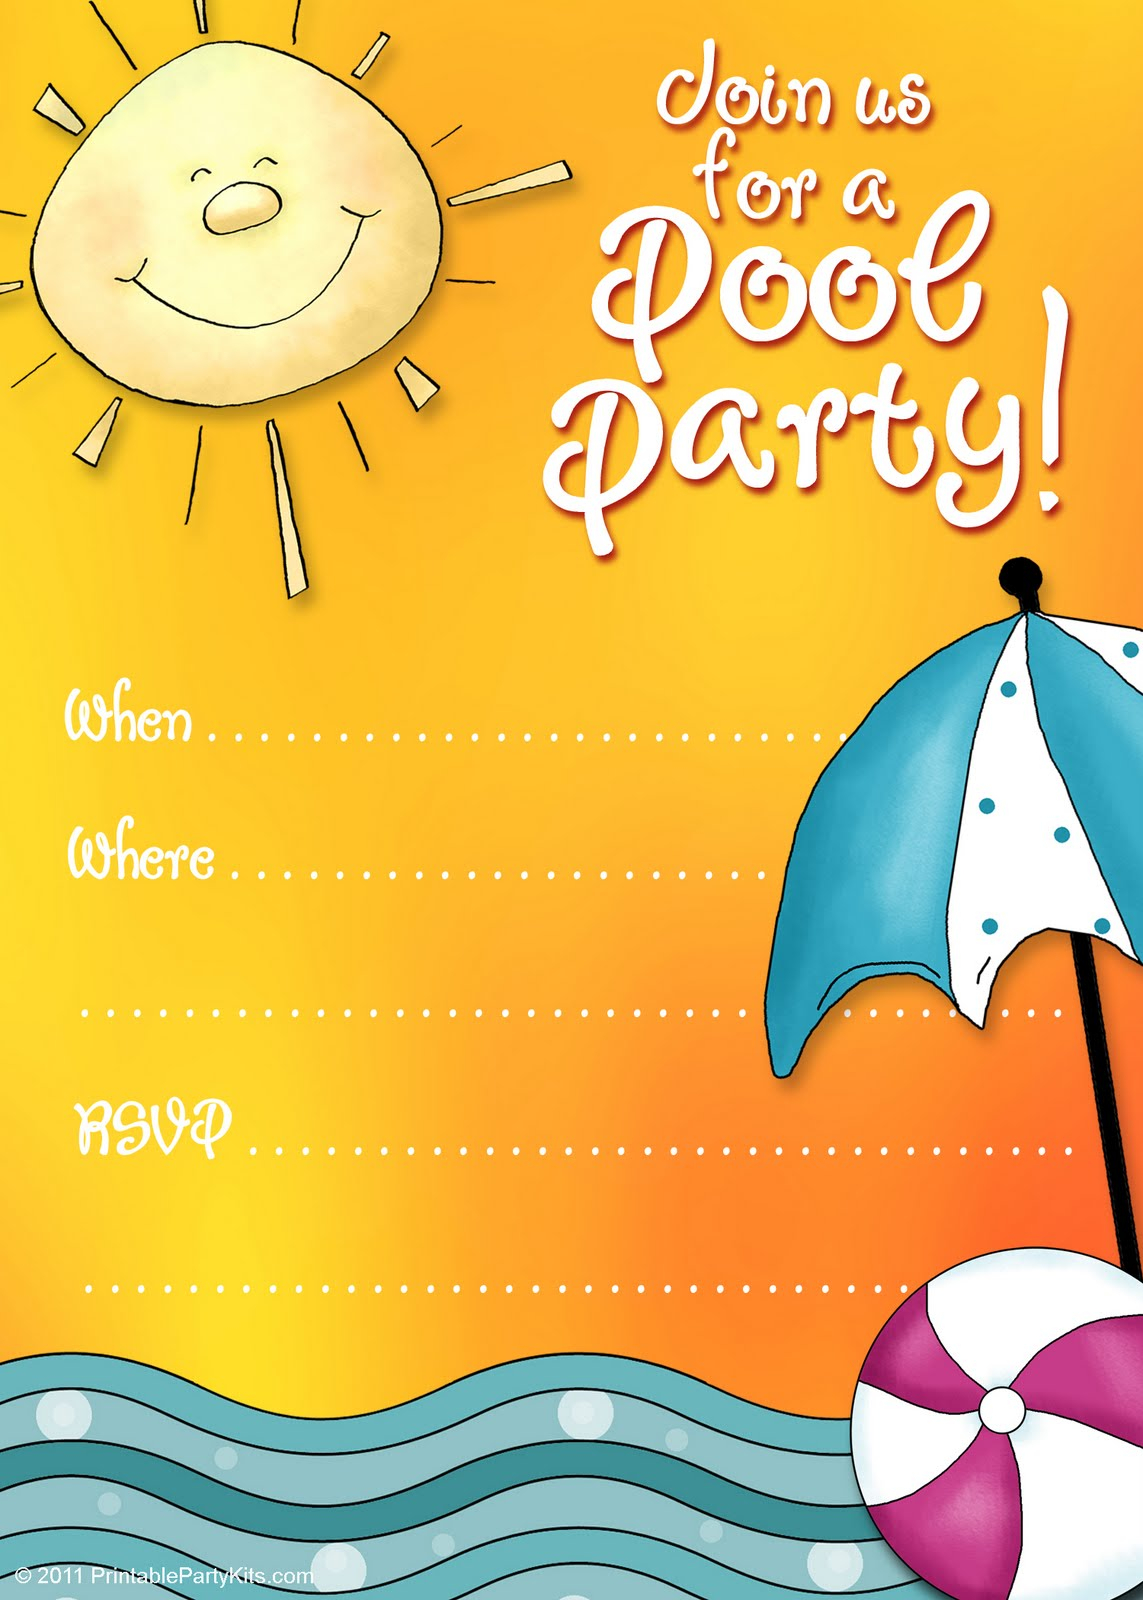 Free Printable Pool Party Invitation Cards